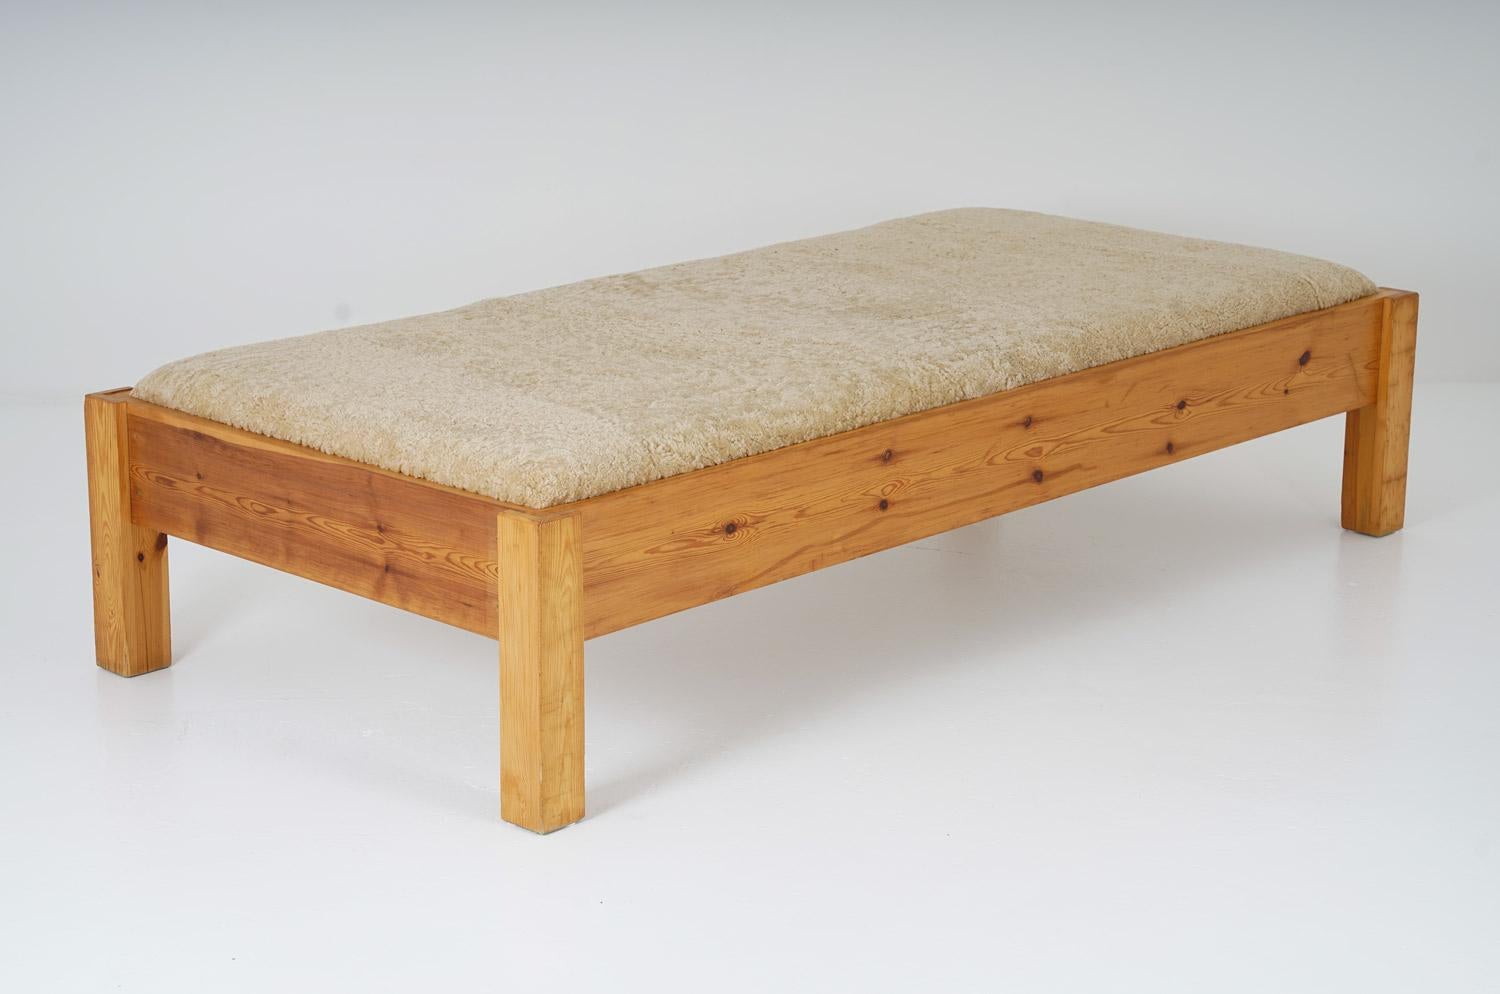 Swedish Daybed in Pine, Upholstered in Sheepskin In Good Condition For Sale In Karlstad, SE